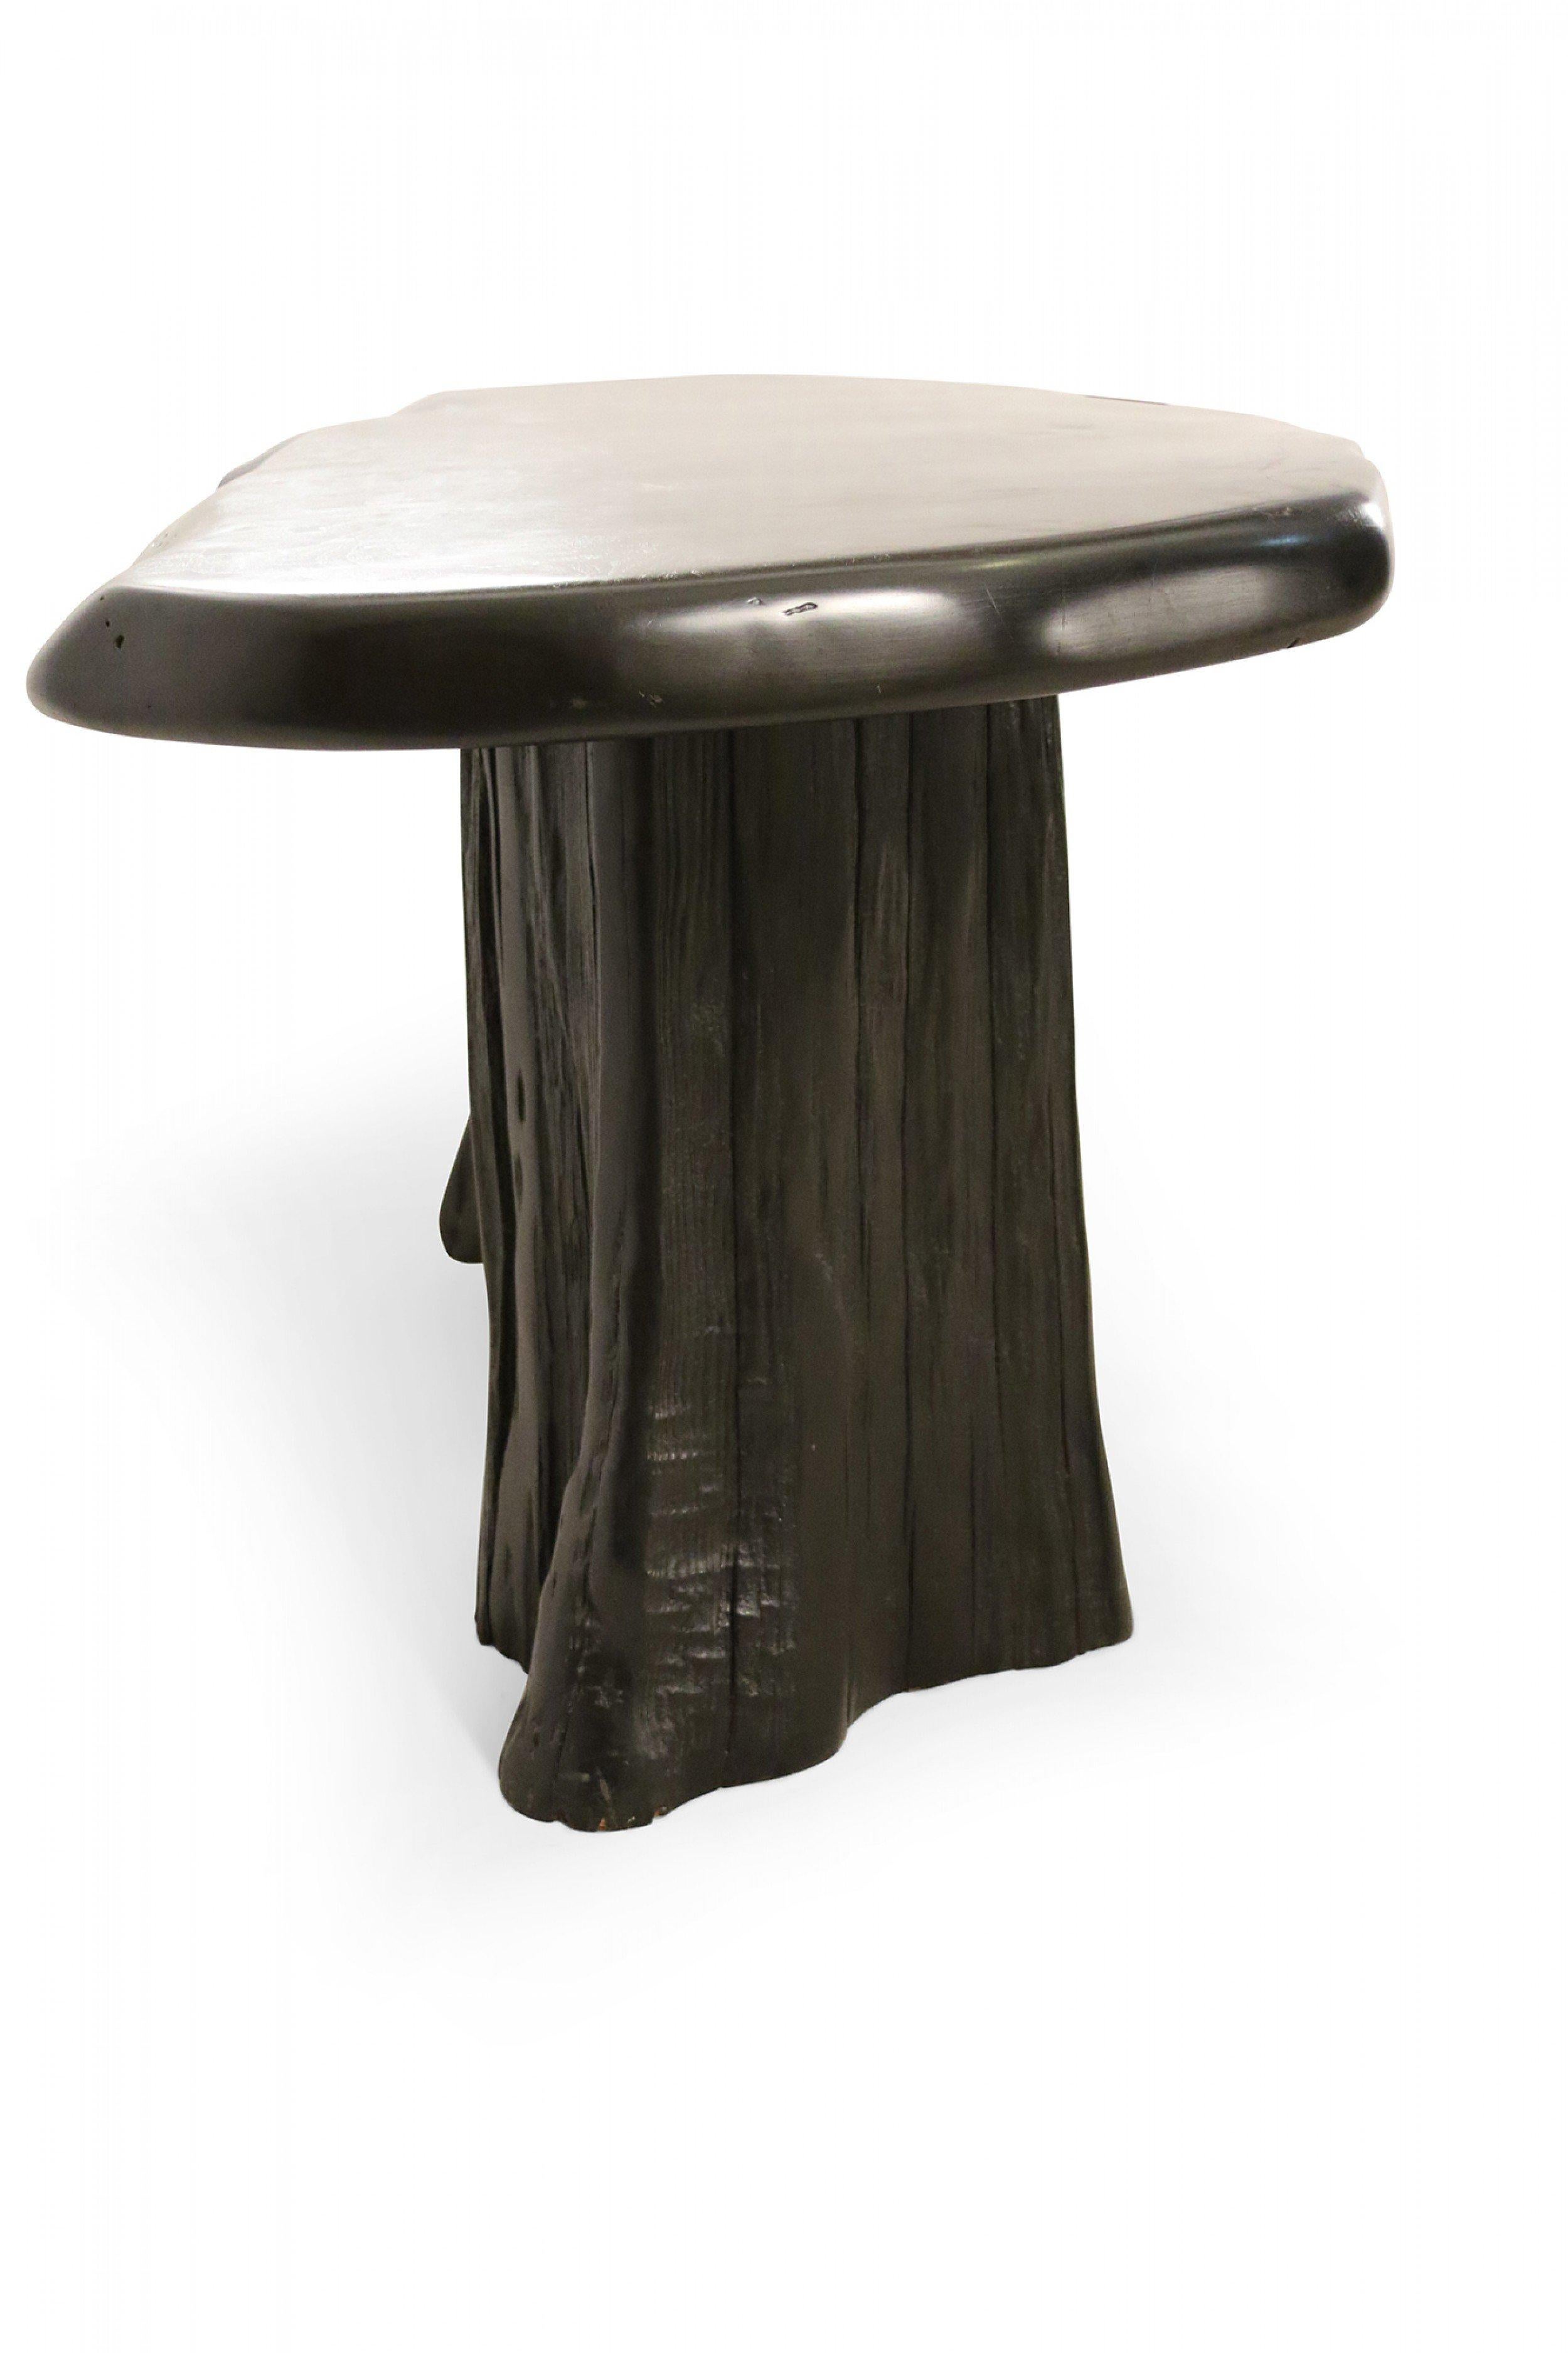 Contemporary Black Painted Tree Trunk Design Desk or Console Table For Sale 7